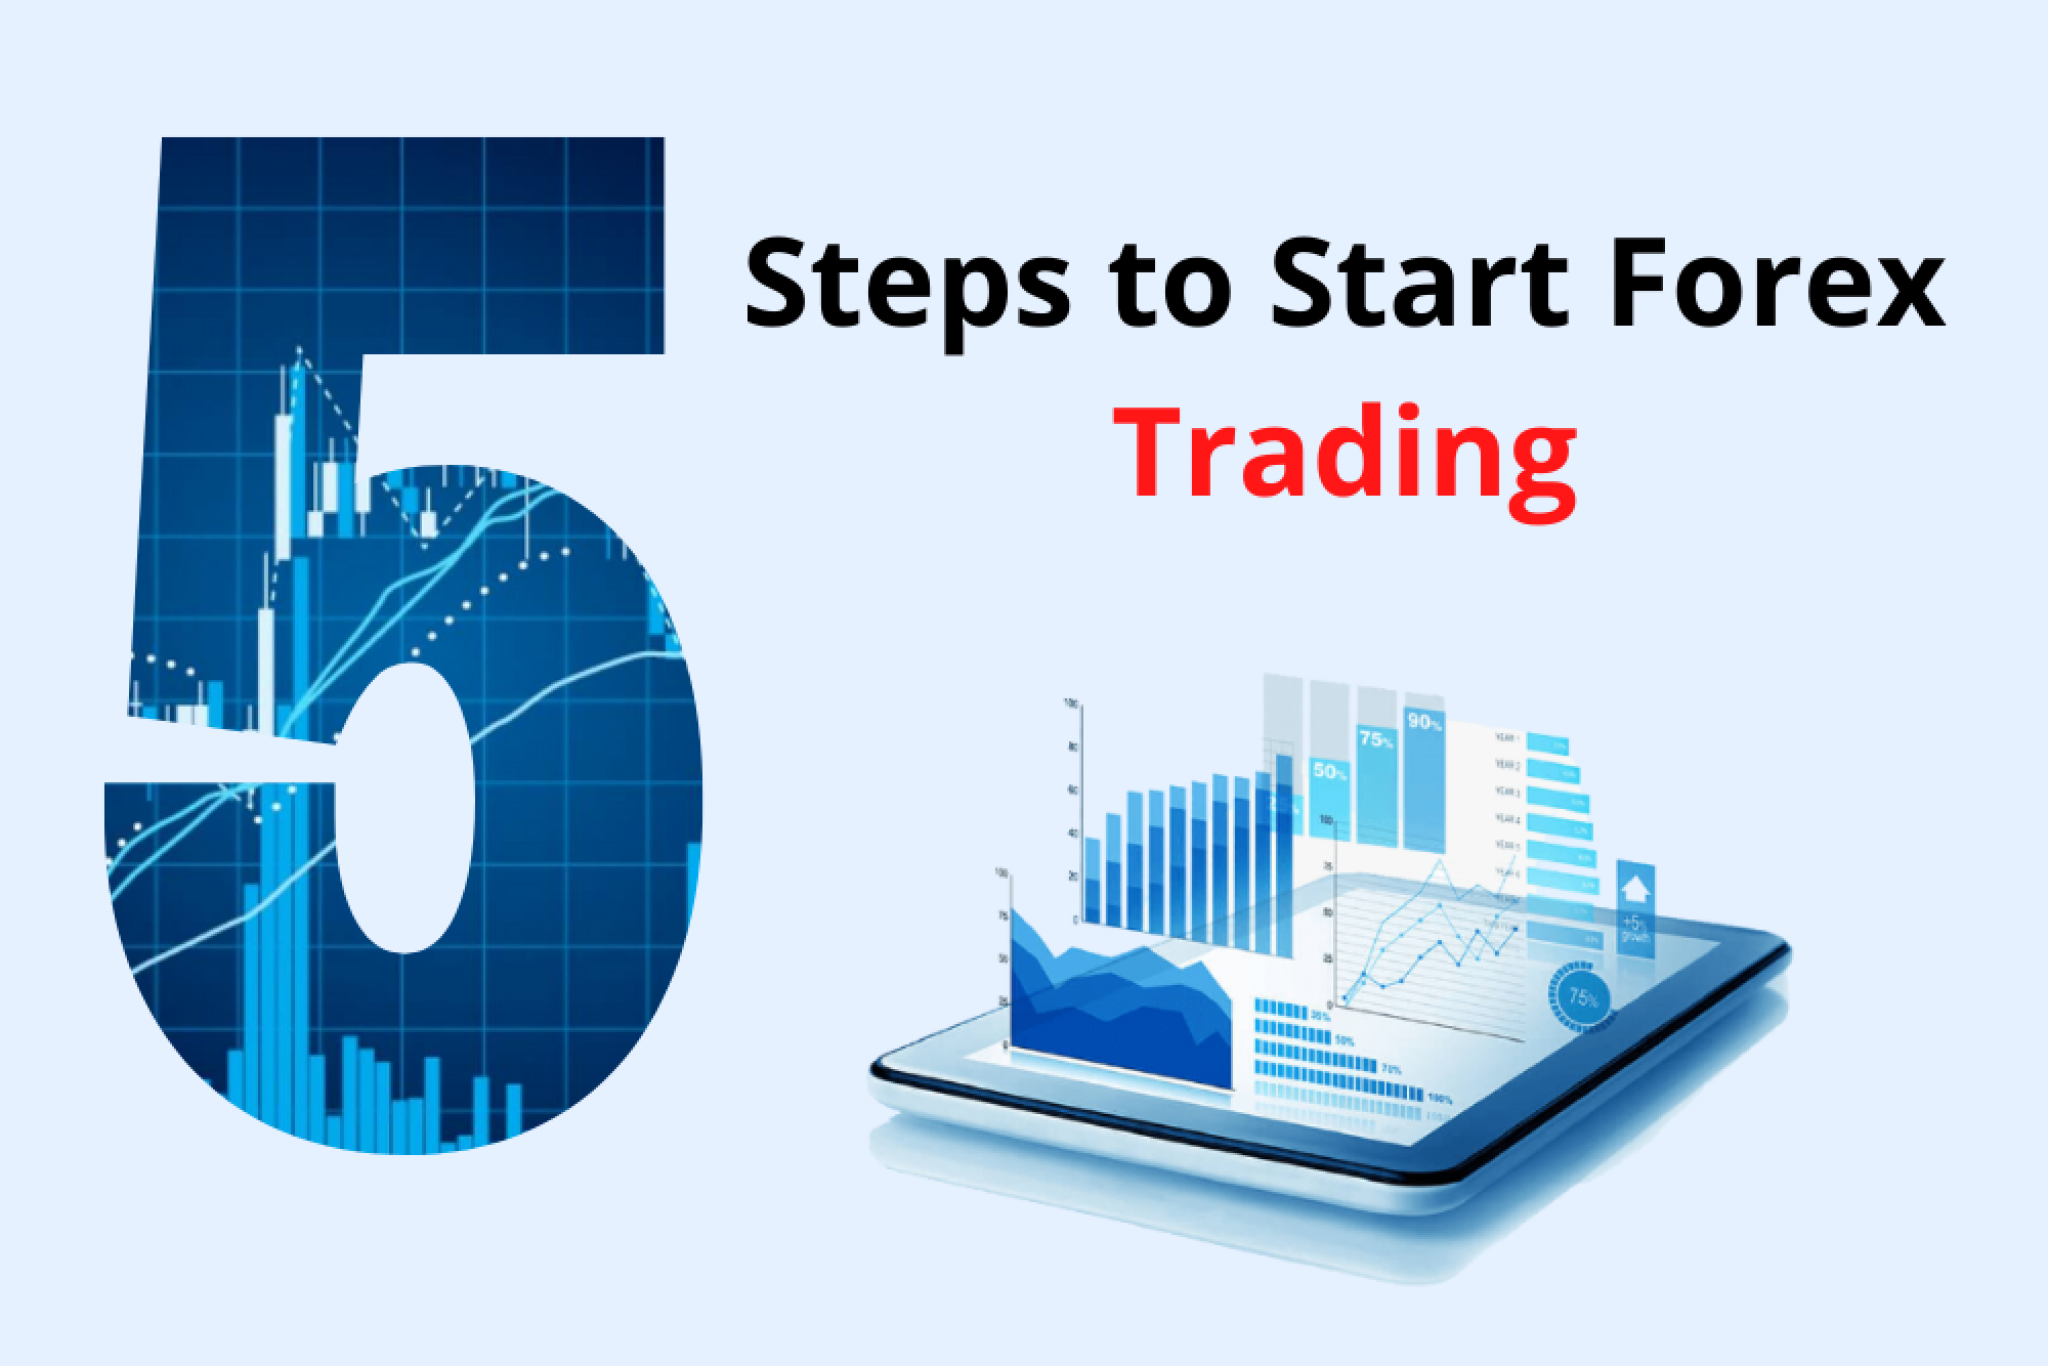 5 simple steps to Start Forex Trading